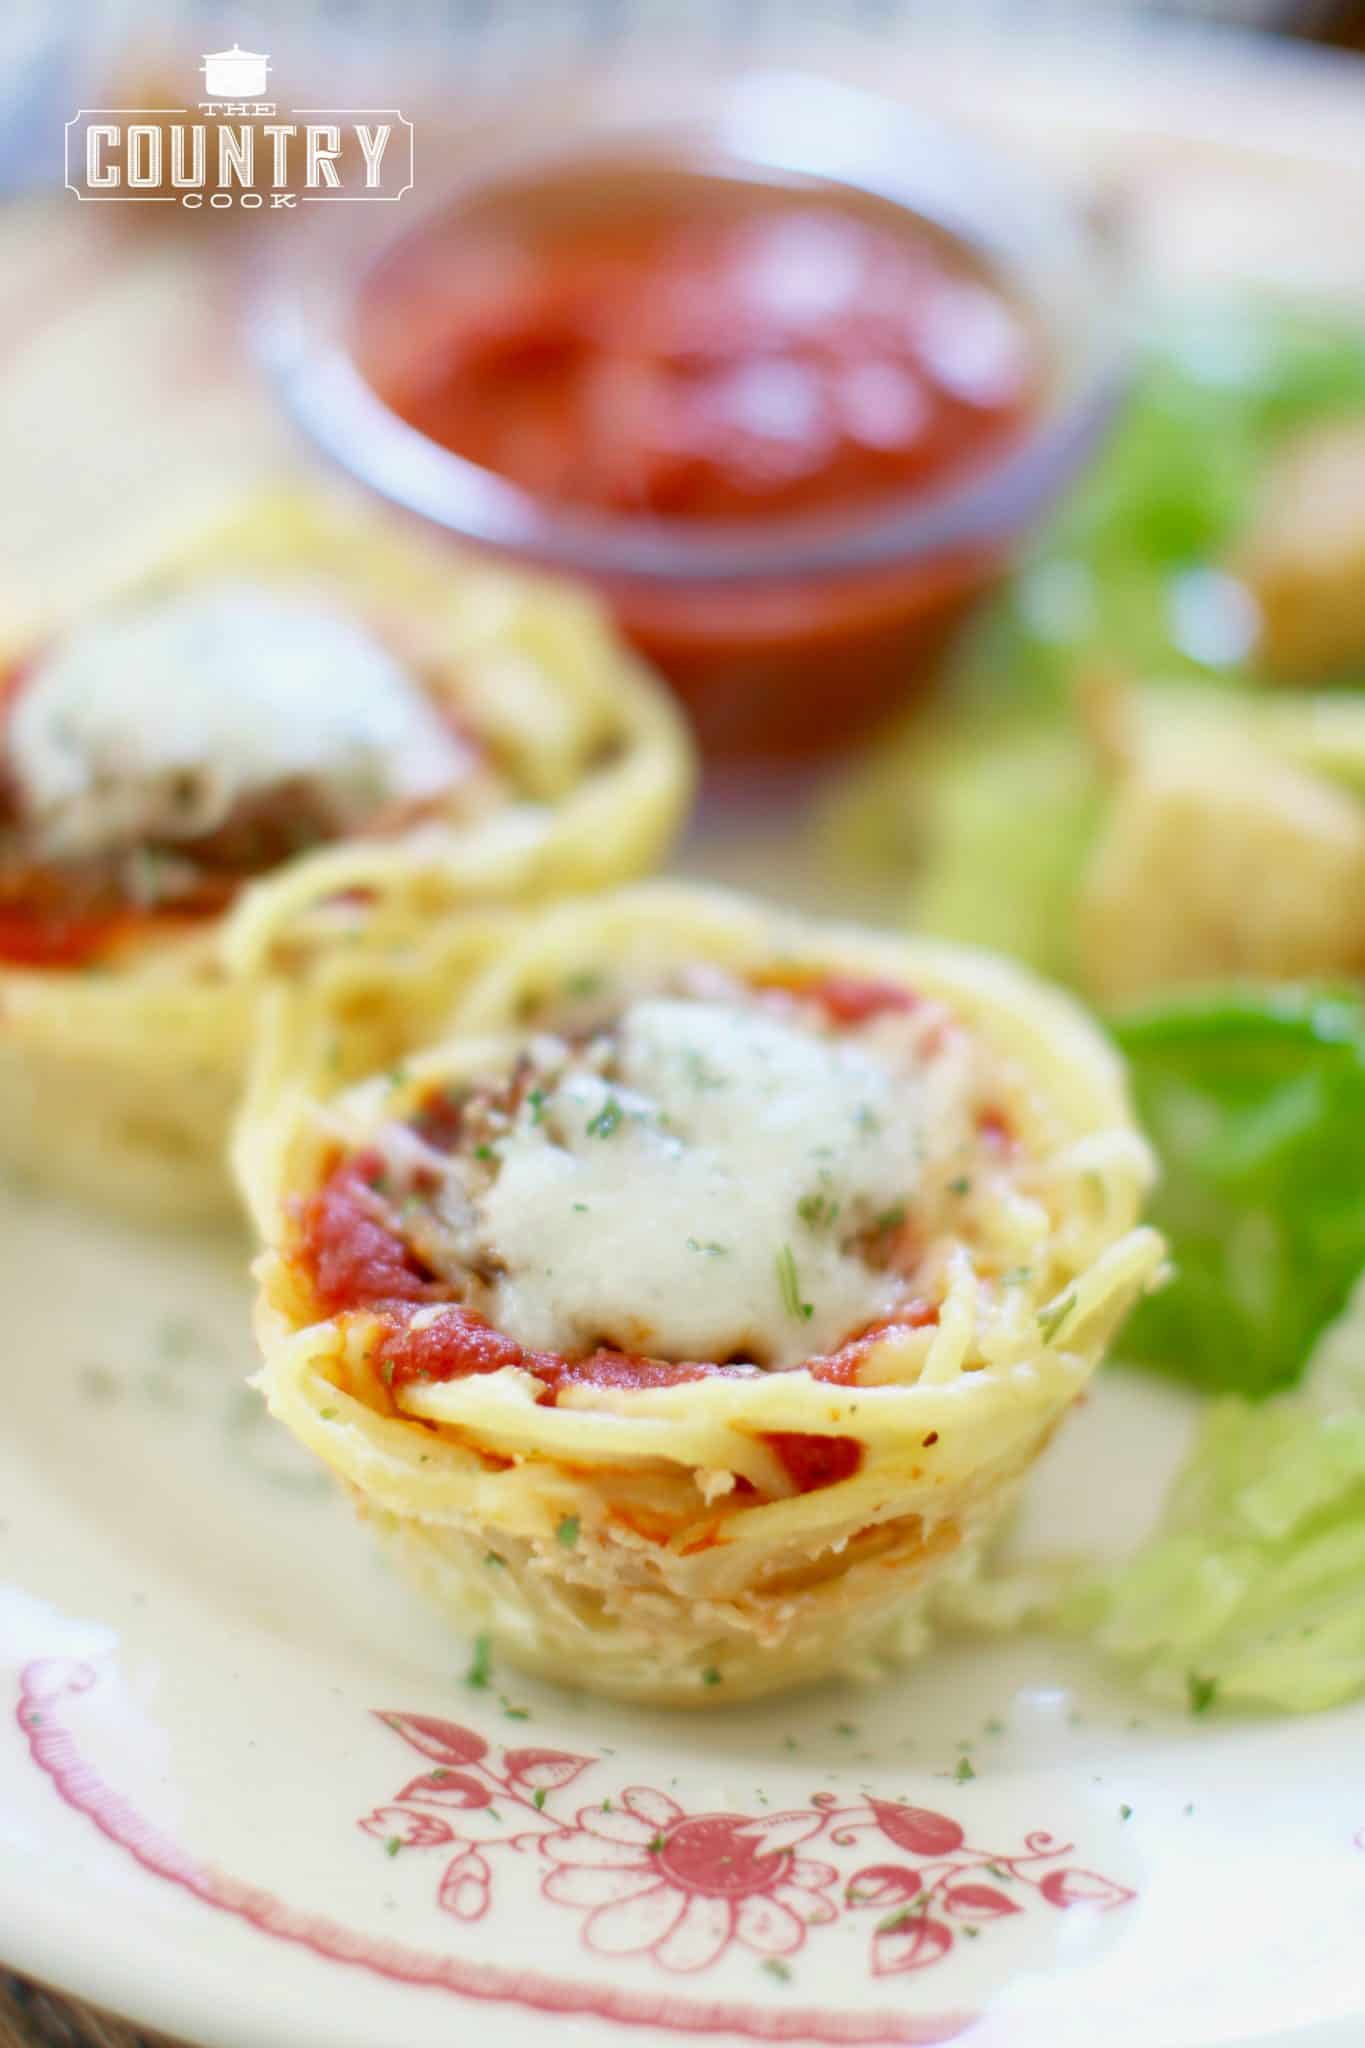 fully cooked spaghetti nests on a plate served with a salad and marinara sauce, sprinkled with parsley flakes